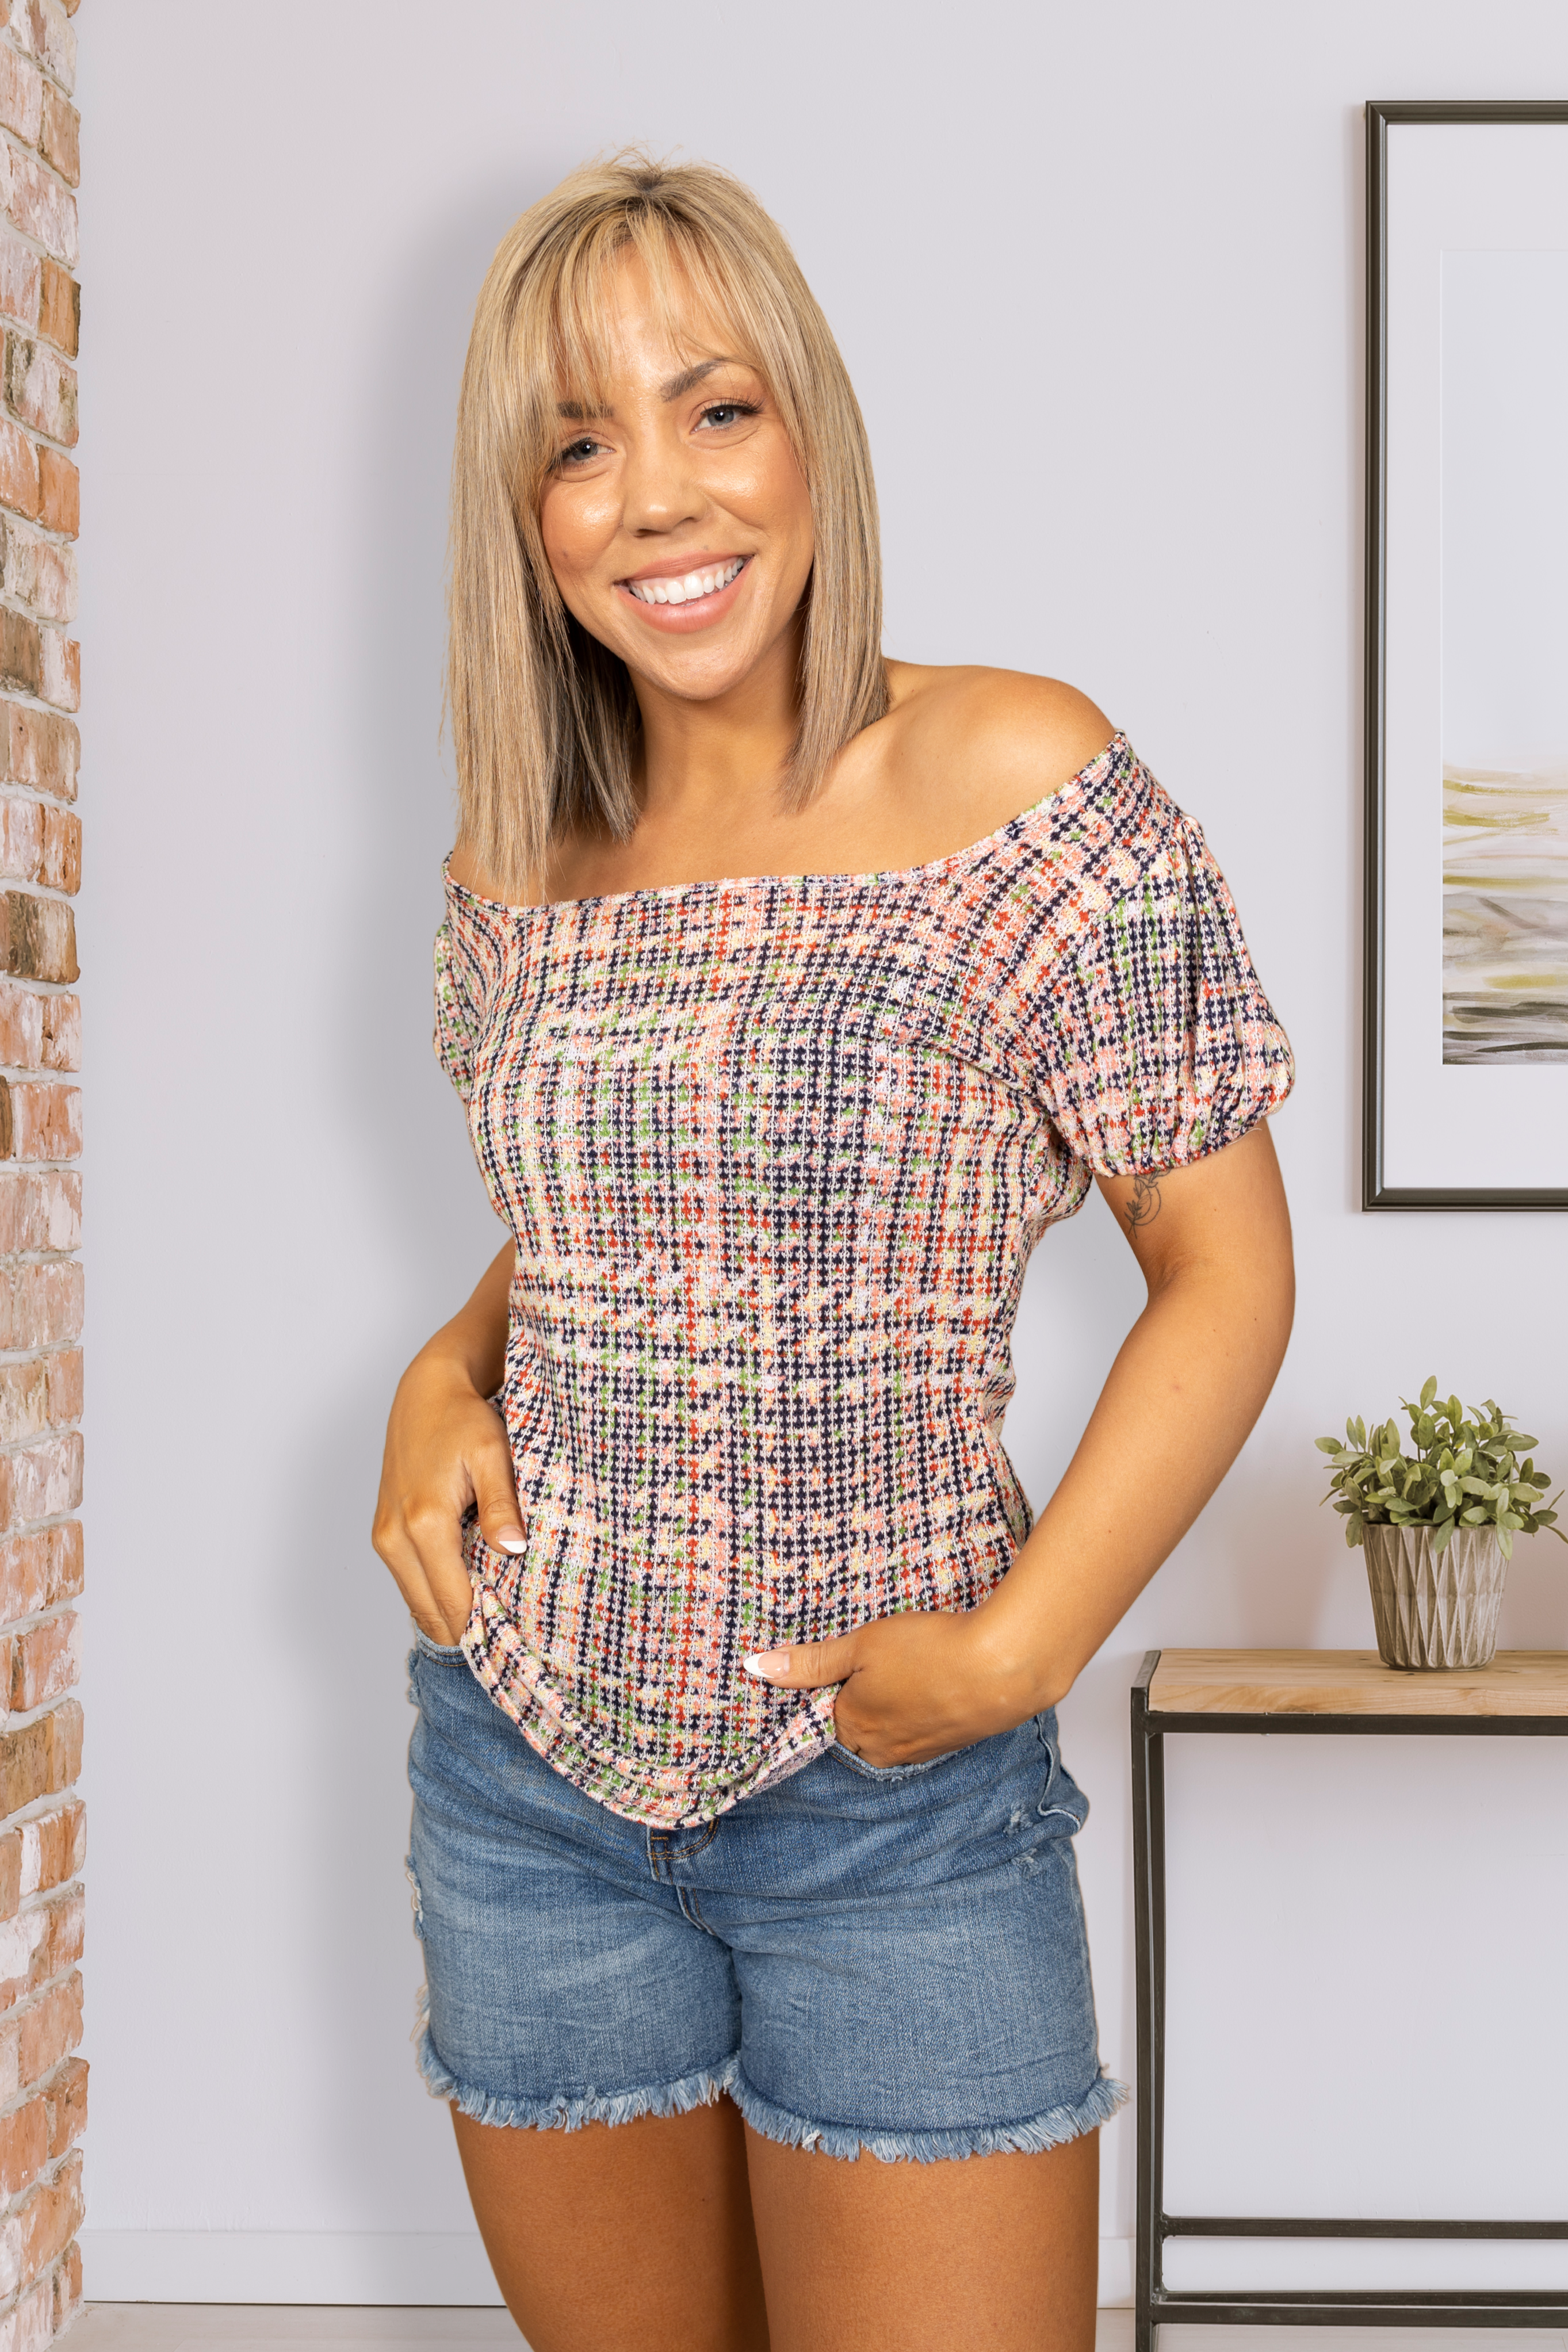 Awe Sooky Sooky Fitted Knit Top